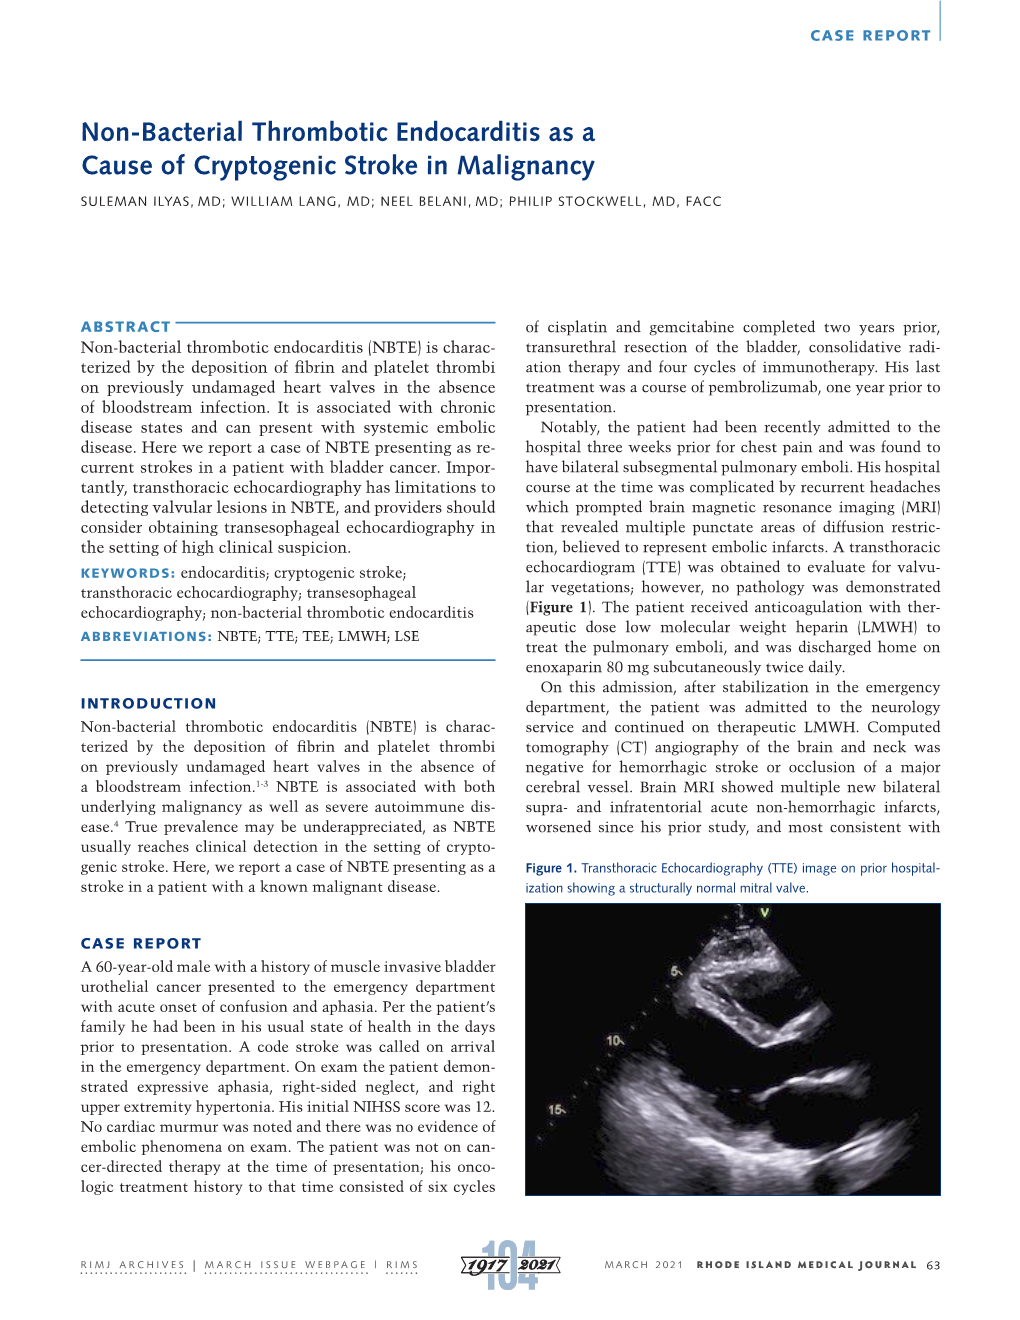 Non-Bacterial Thrombotic Endocarditis As a Cause of Cryptogenic Stroke in Malignancy